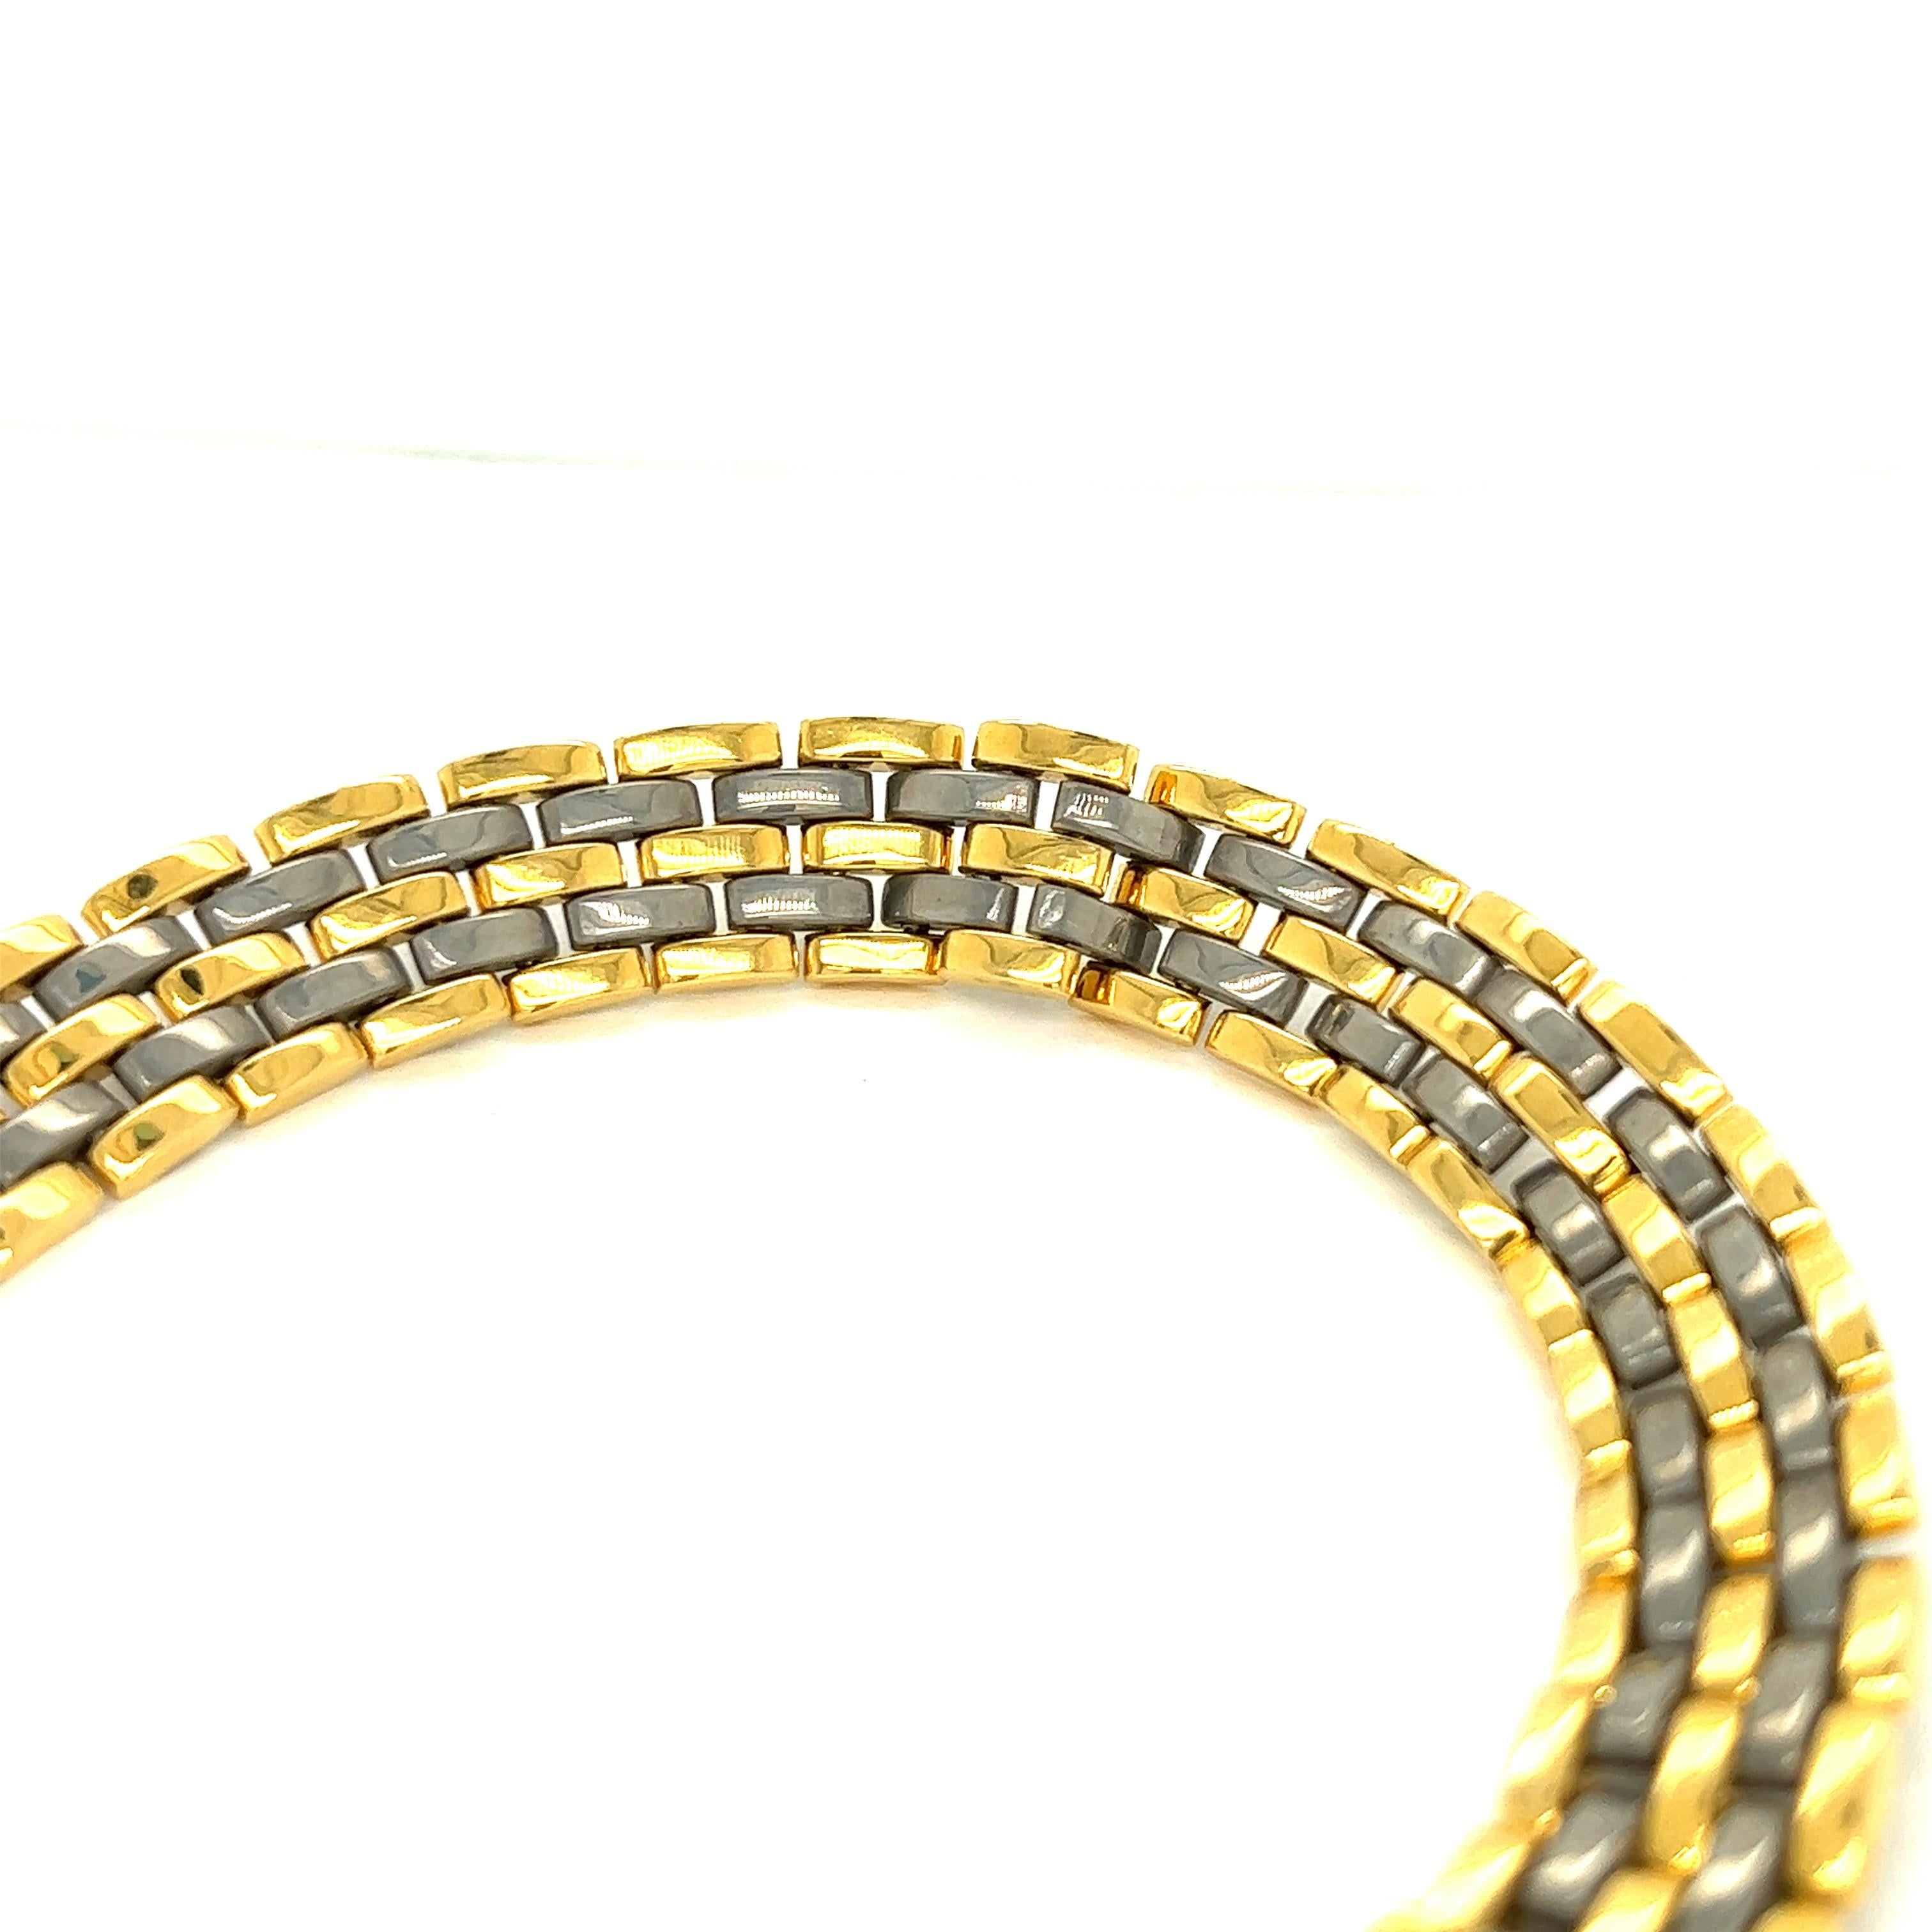 Cartier Maillon Steel & 18k Yellow Gold Link Collar Necklace

From the luxury brand's iconic Maillon collection, this collar necklace is made of alternating steel and 18 karat yellow gold links; marked Cartier, 790974

Size: length 42.5 cm, width